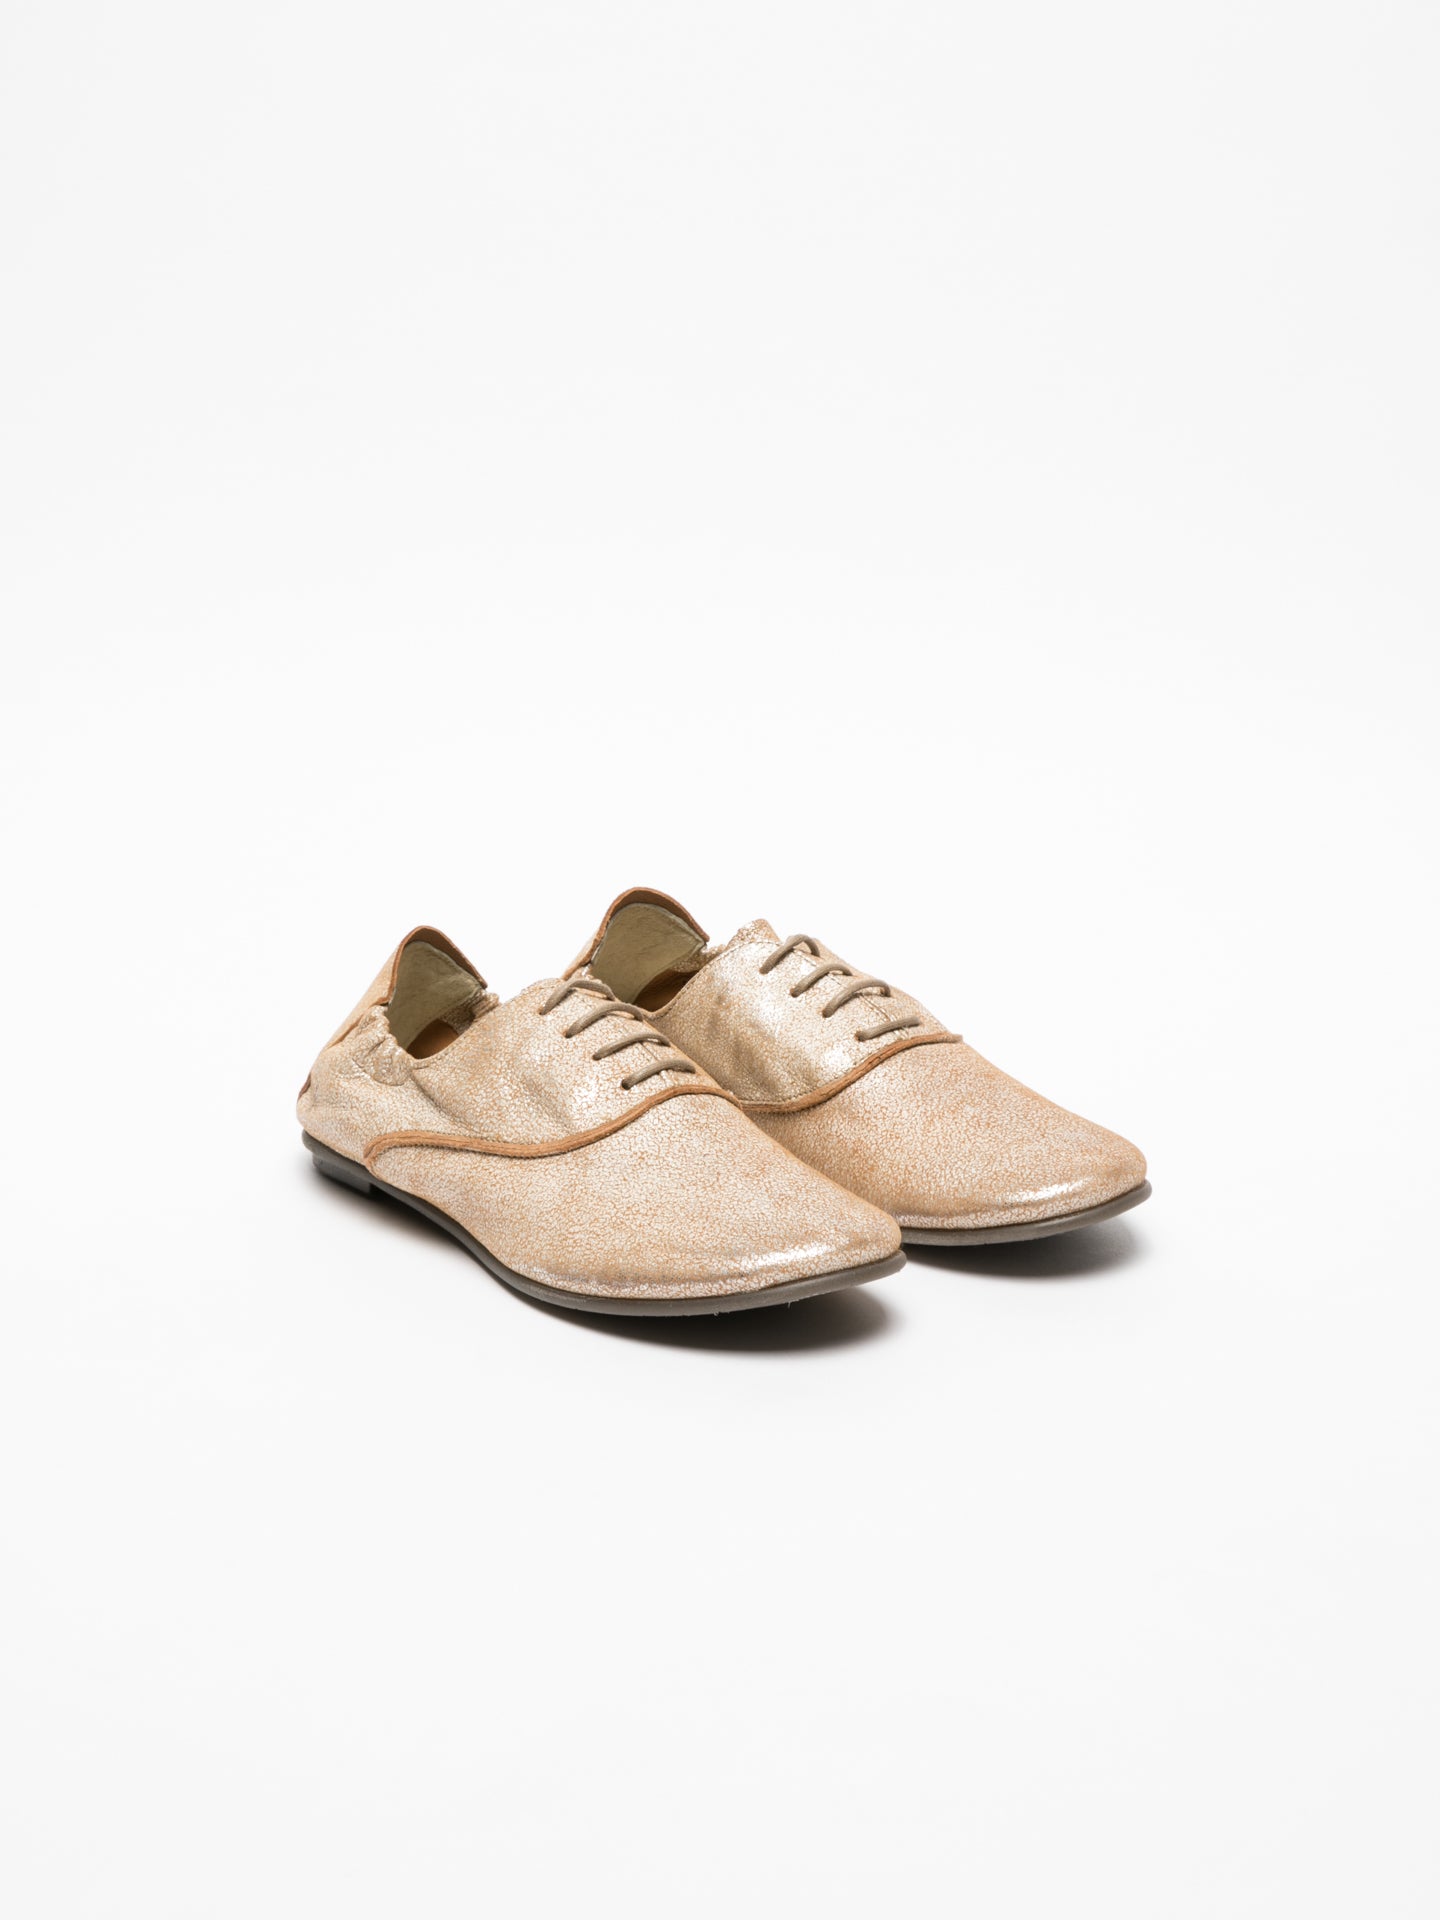 Fly London Beige Oxford Shoes